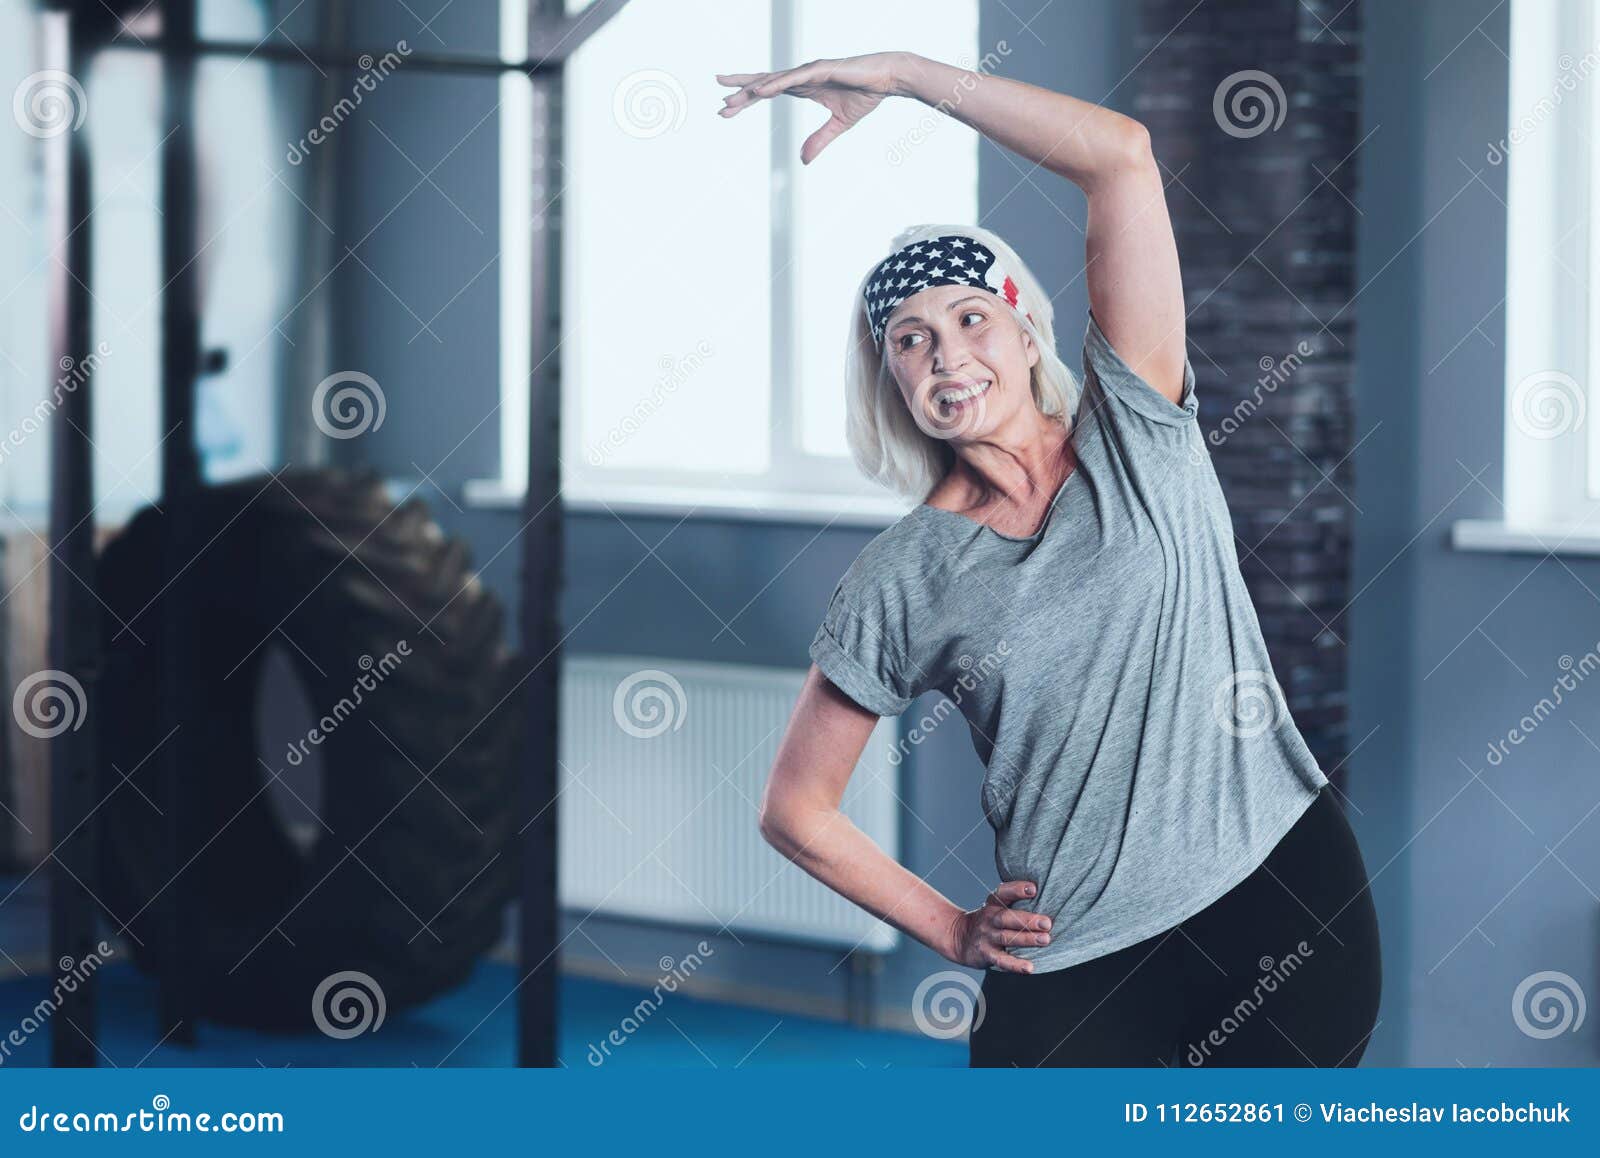 Cheerful Mature Lady Stretching During Training Session Stock Image